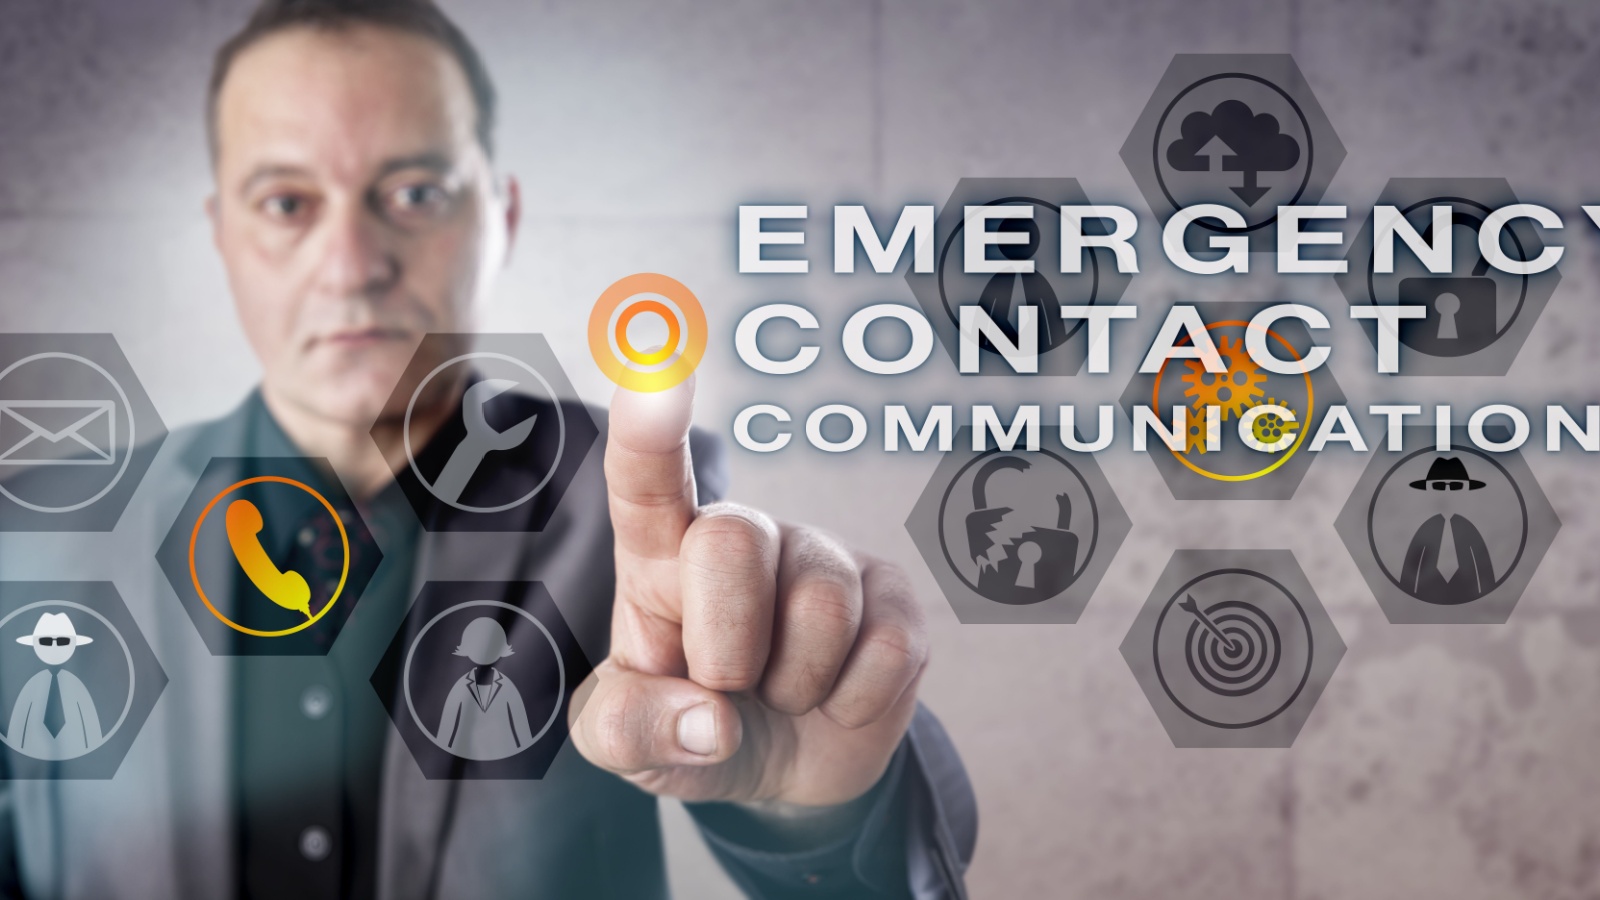 Corporate executive is reaching out for an EMERGENCY CONTACT COMMUNICATION onscreen. Information technology and cybersecurity concept for the execution of a prepared and effective incident response.